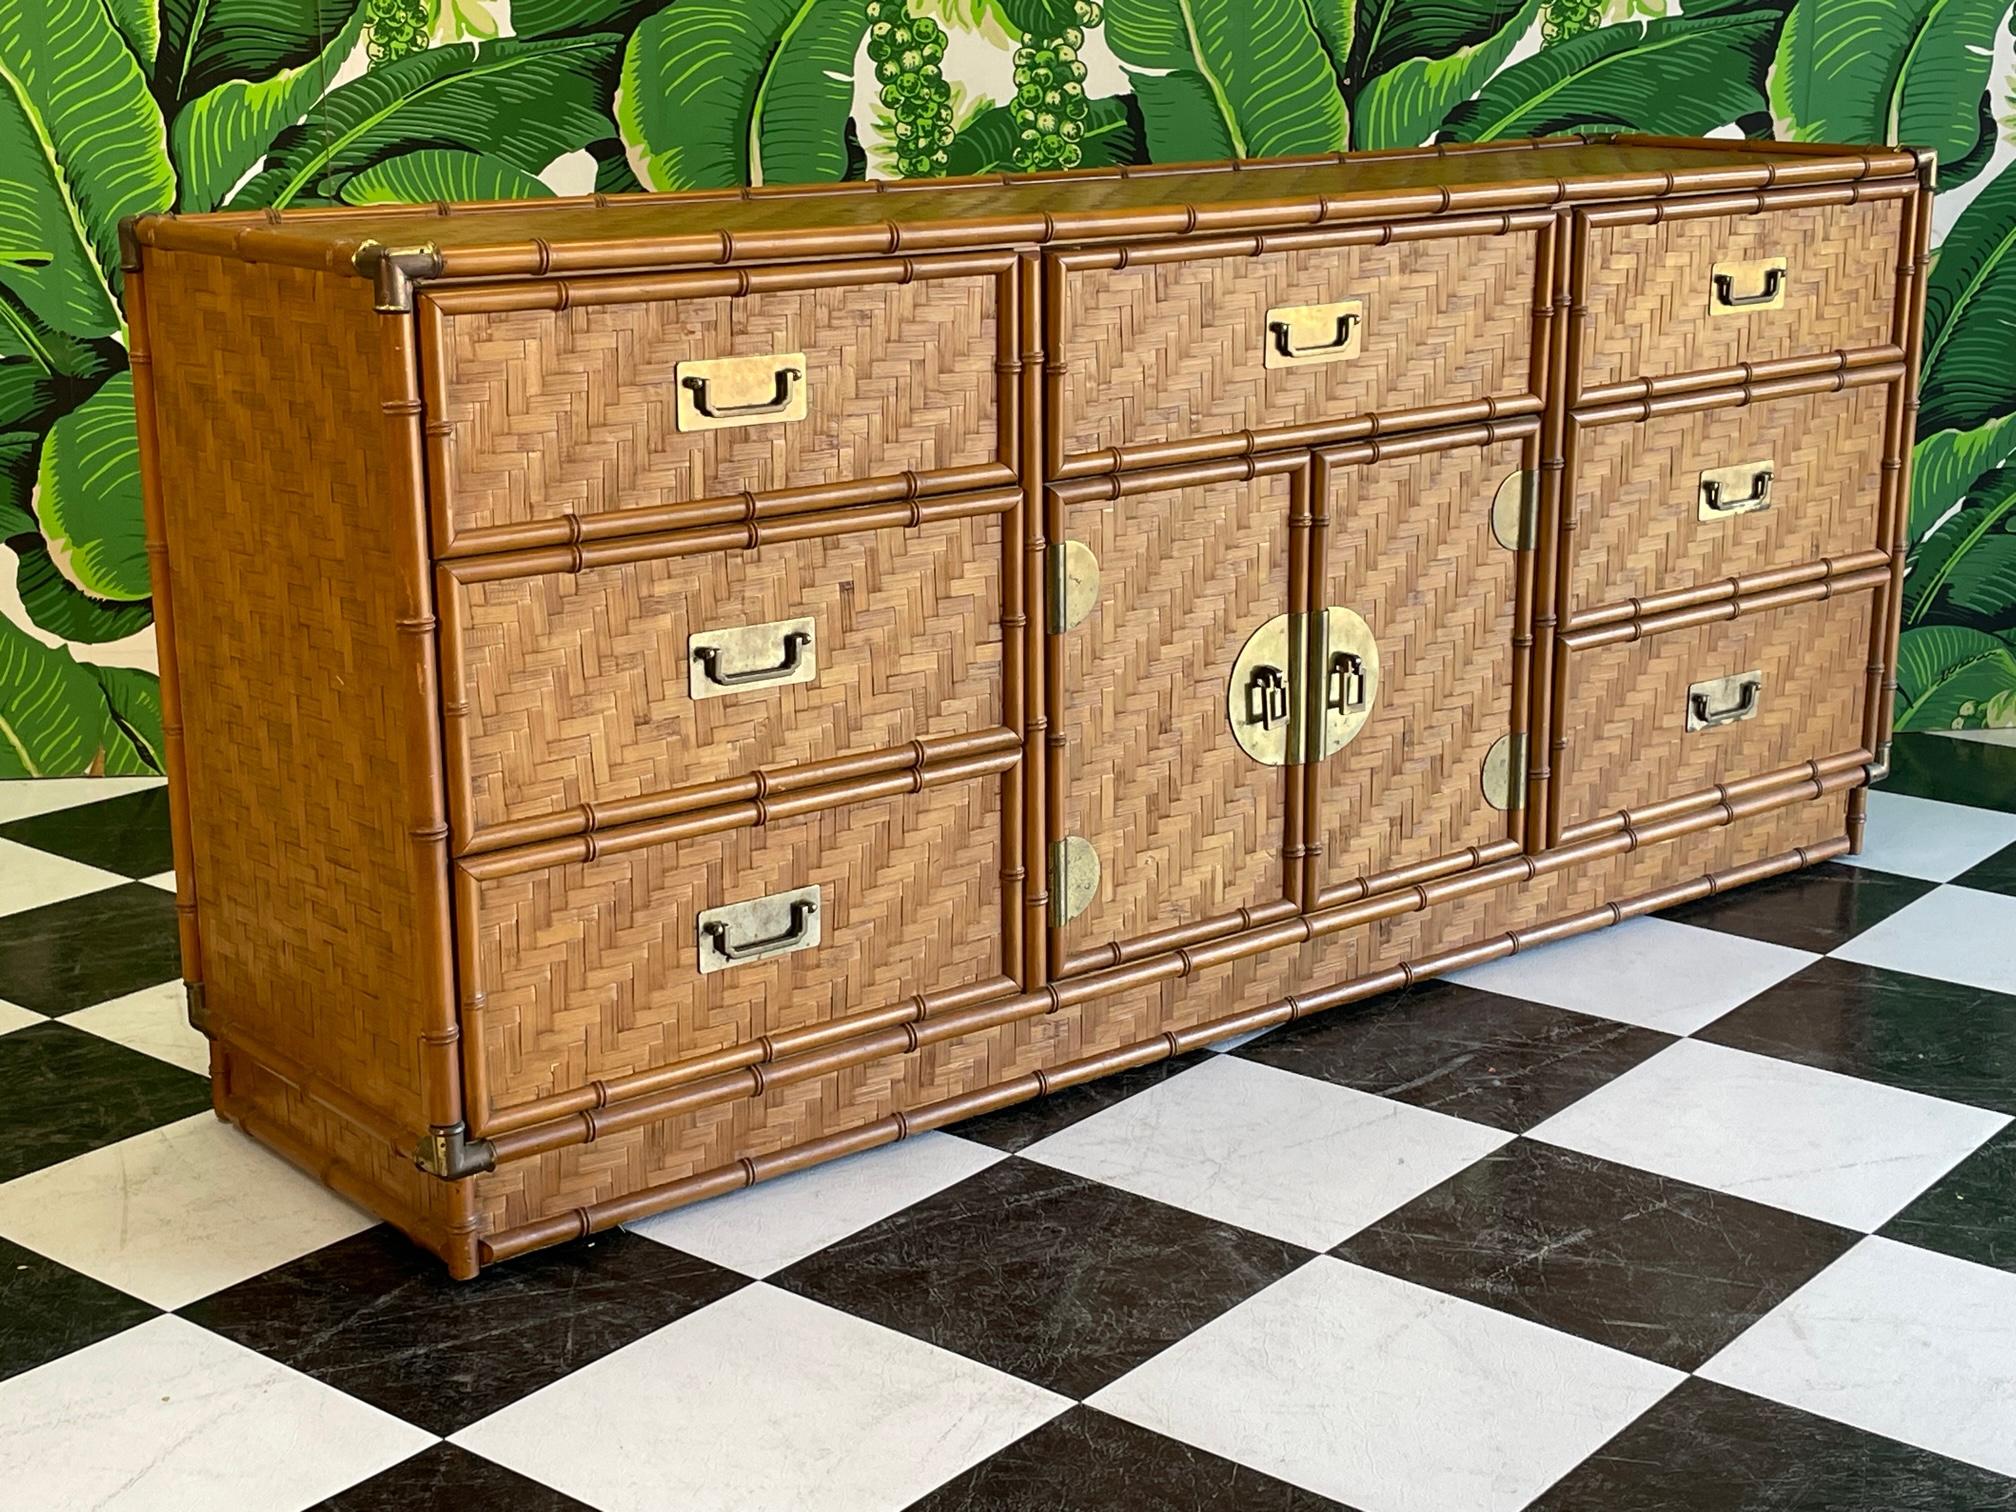 Vintage campaign style 9-drawer dresser features faux bamboo detailing and a complete veneer of woven rattan basket weave in a herringbone pattern. Brass hardware and corner accents. The unique rattan veneer gives a look of parquet. Warm, rich tone